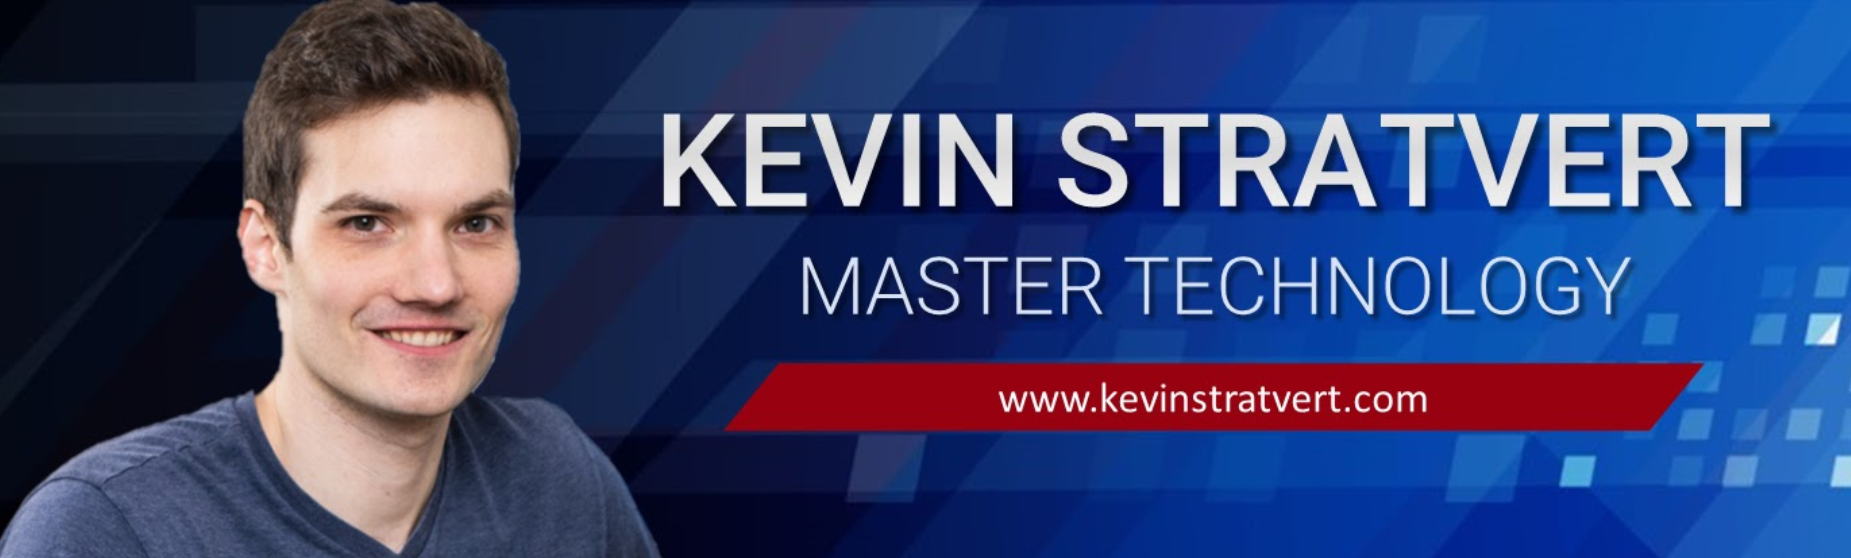 All YouTube Microsoft Teams tutorials by Kevin Stratvert